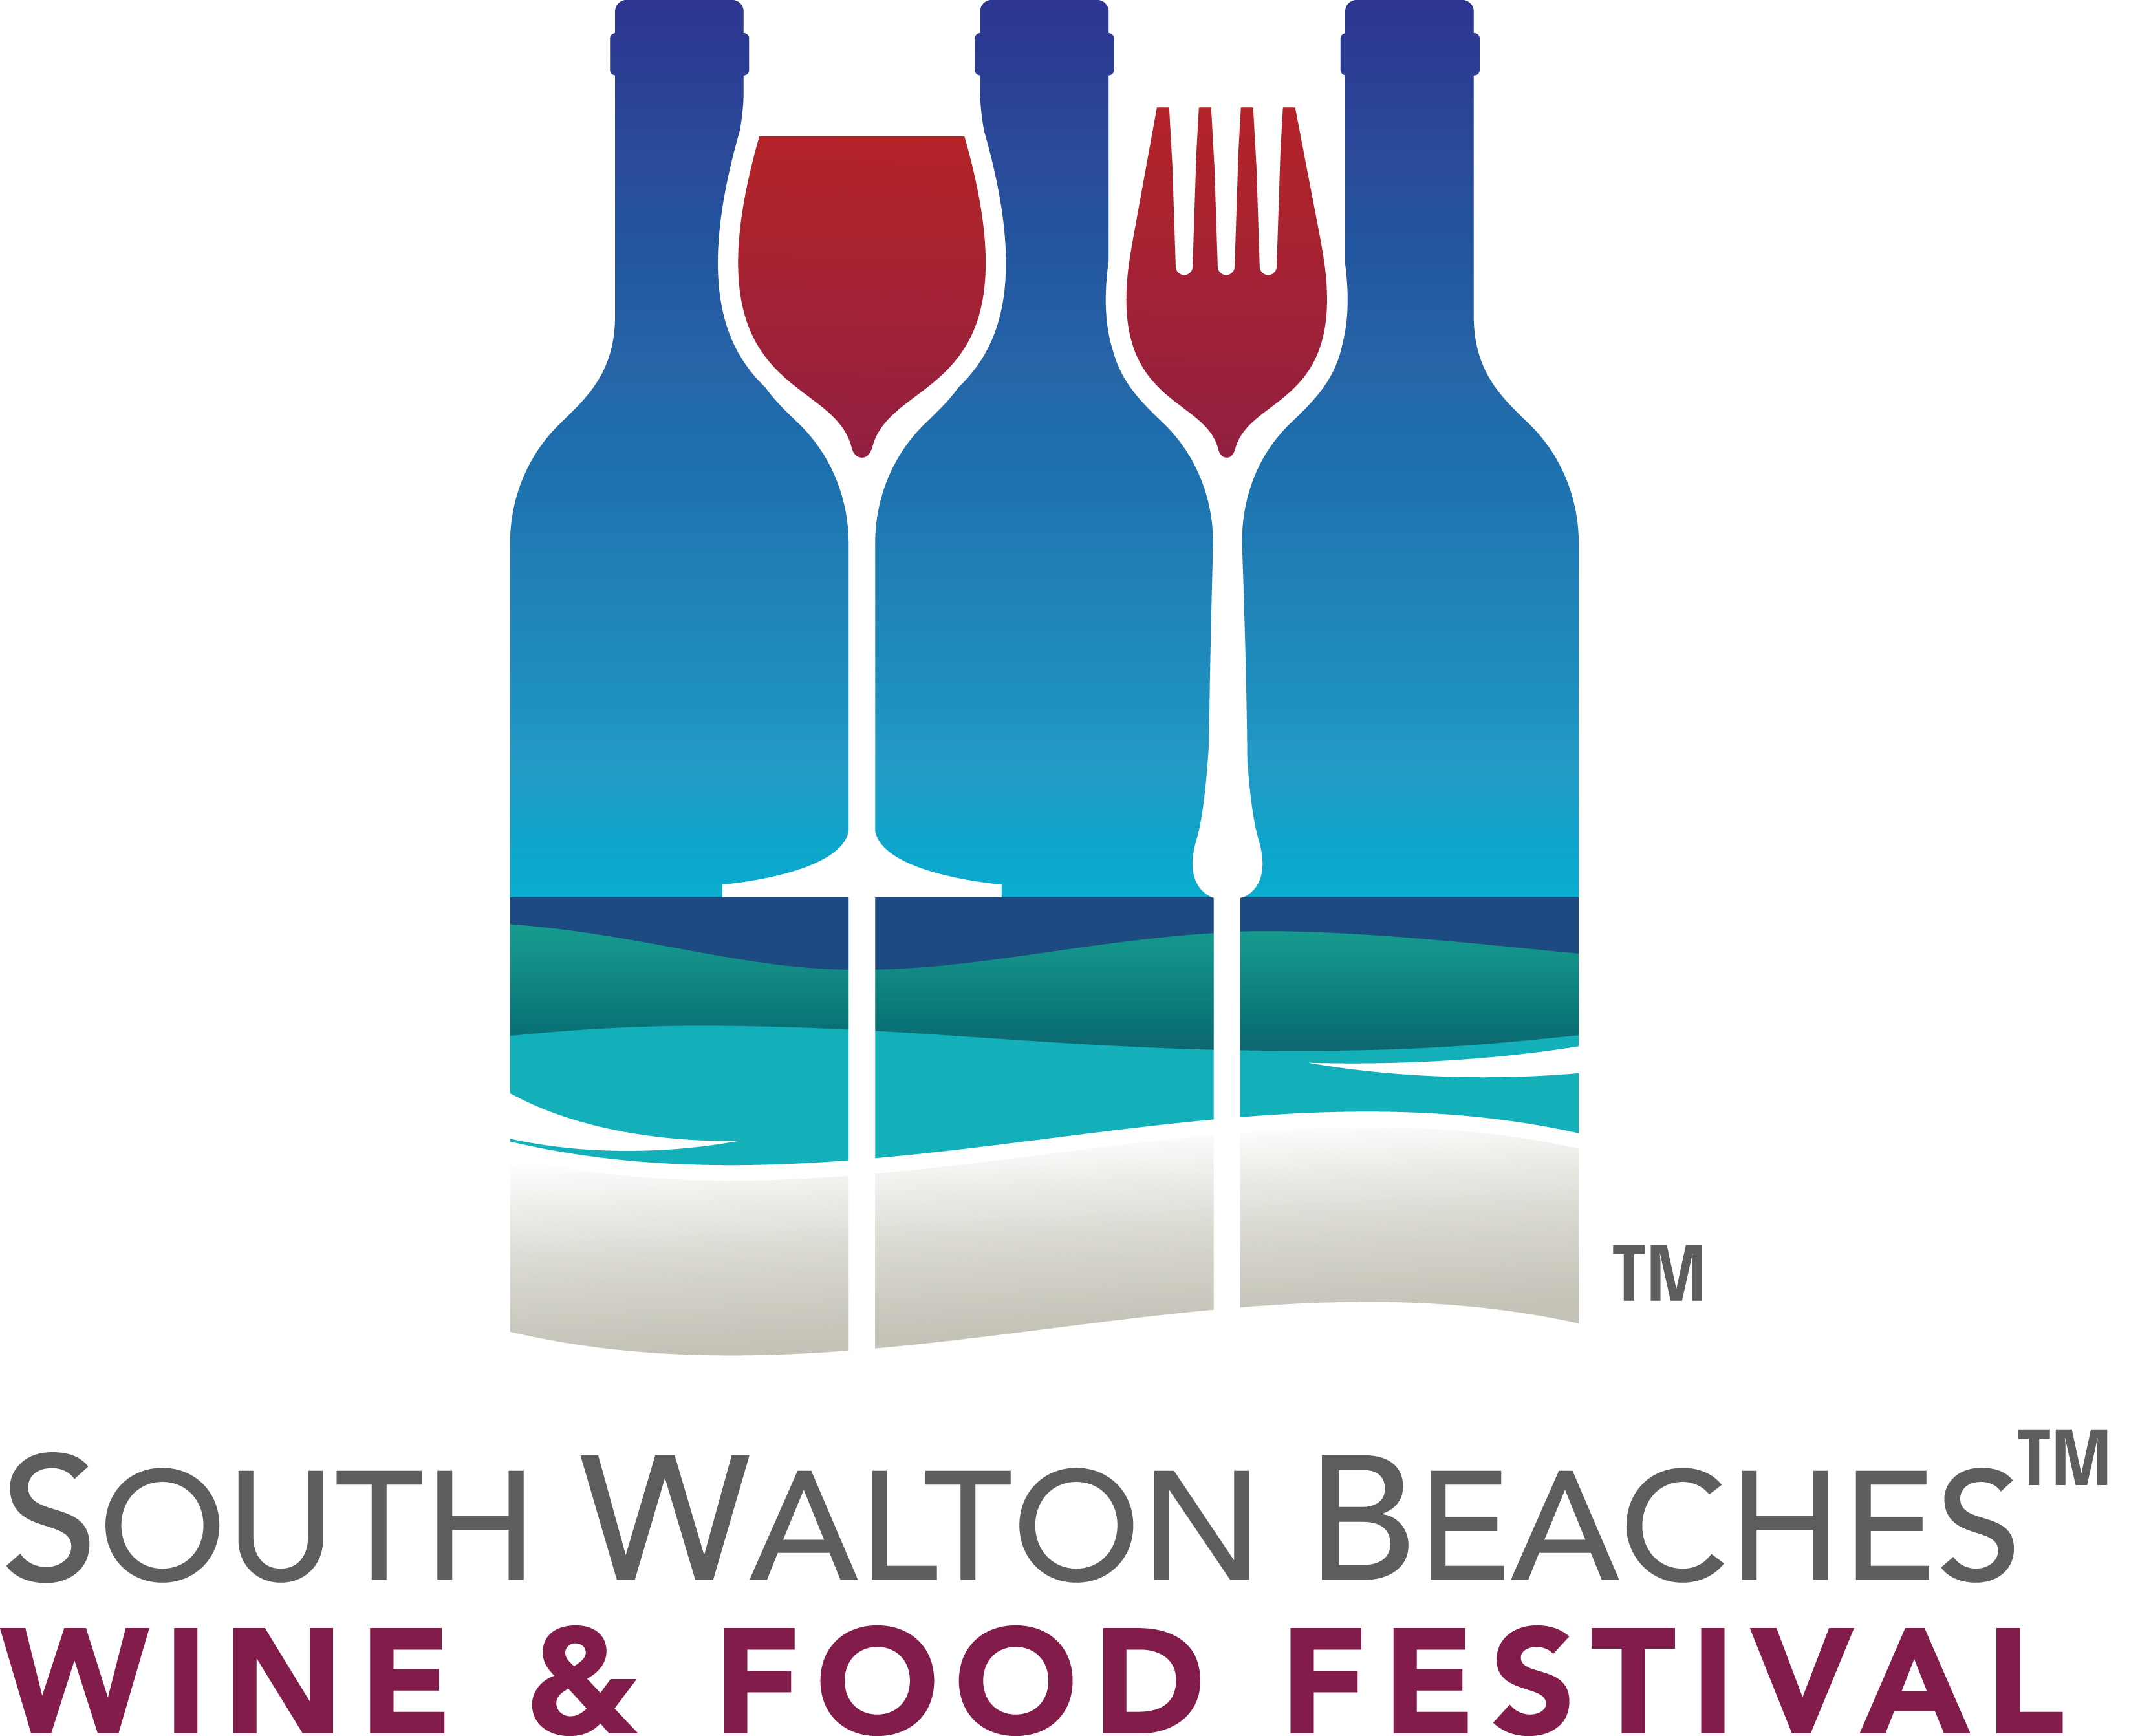 The 2019 South Walton Beaches Wine & Food Festival will be held April 25 - 28 in Grand Boulevard at Sandestin on the Northwest Florida Coast.